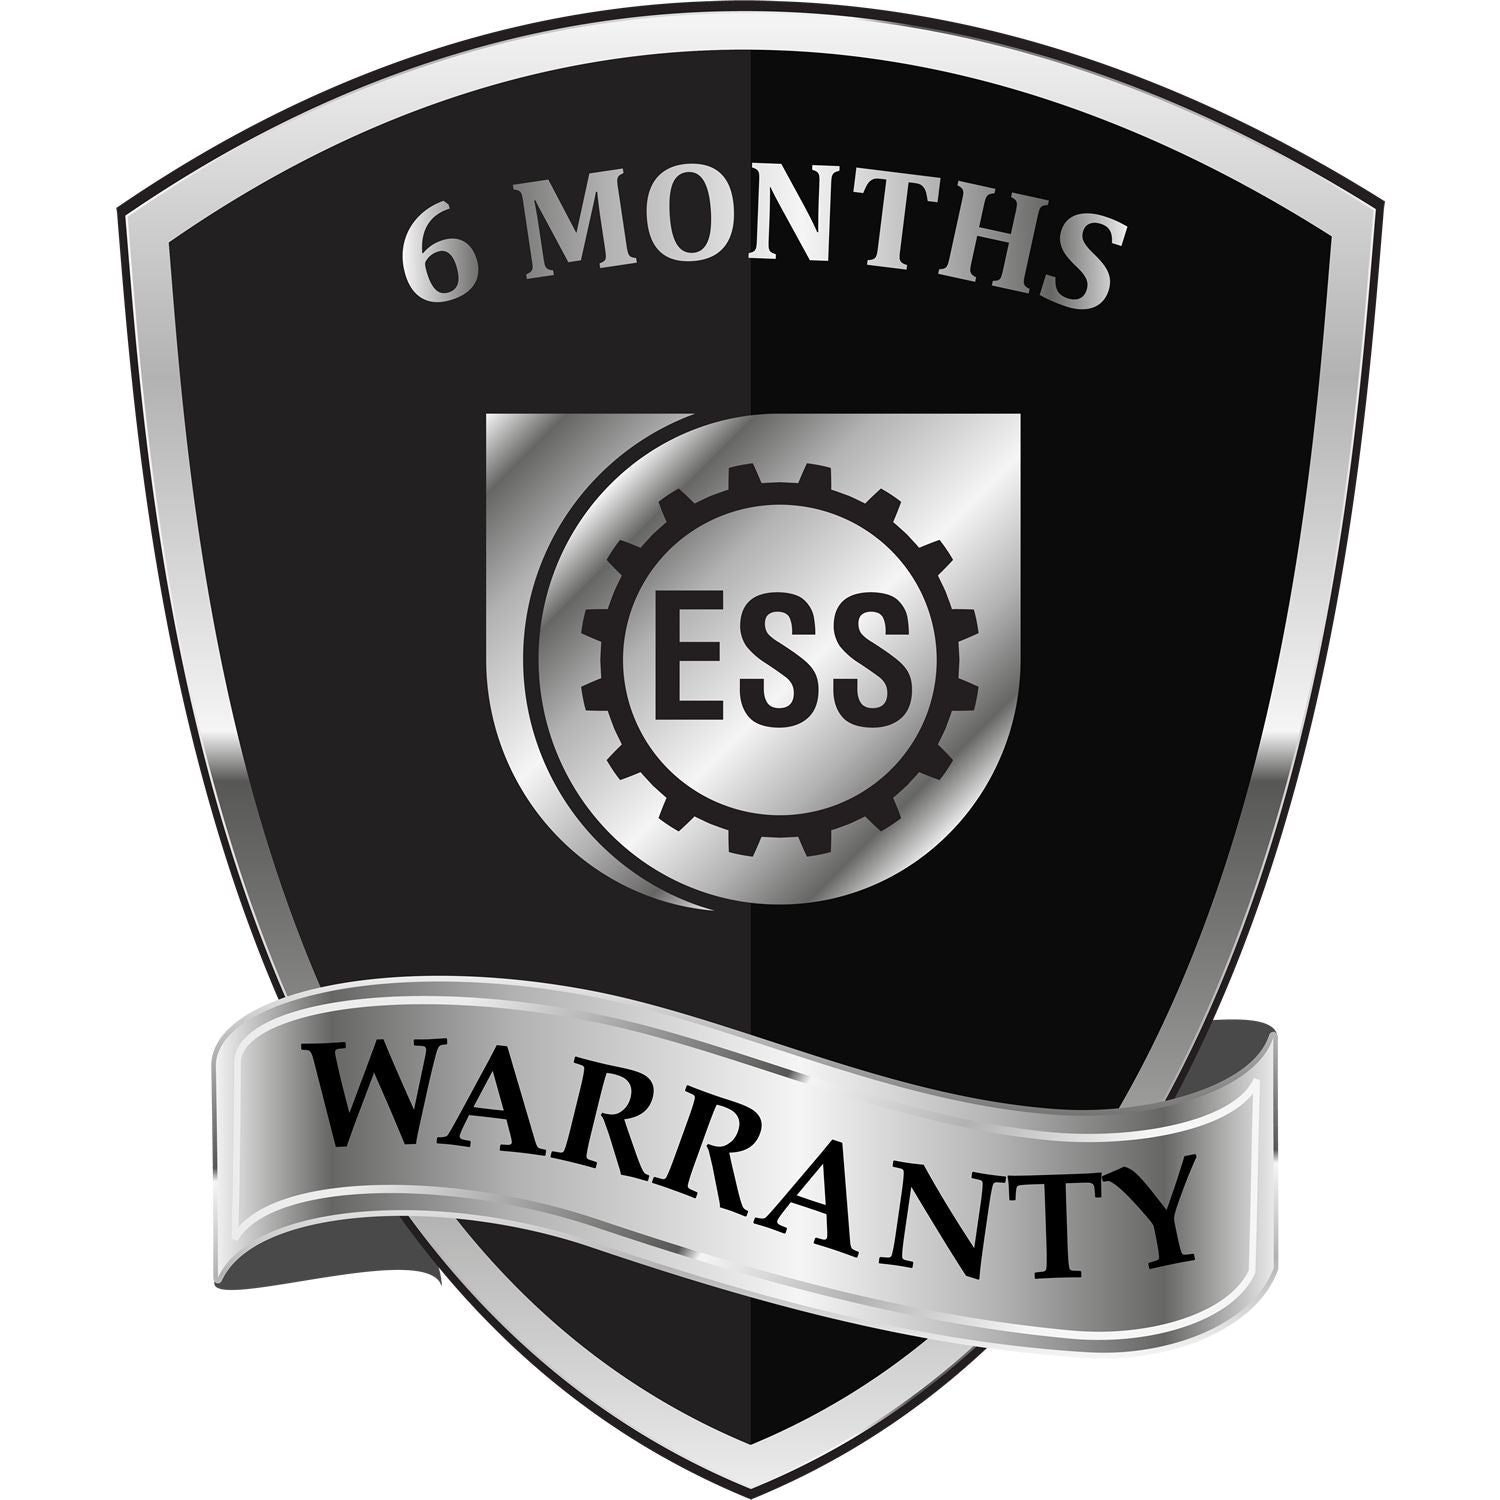 A badge or emblem showing a warranty icon for the New Mexico Professional Engineer Seal Stamp